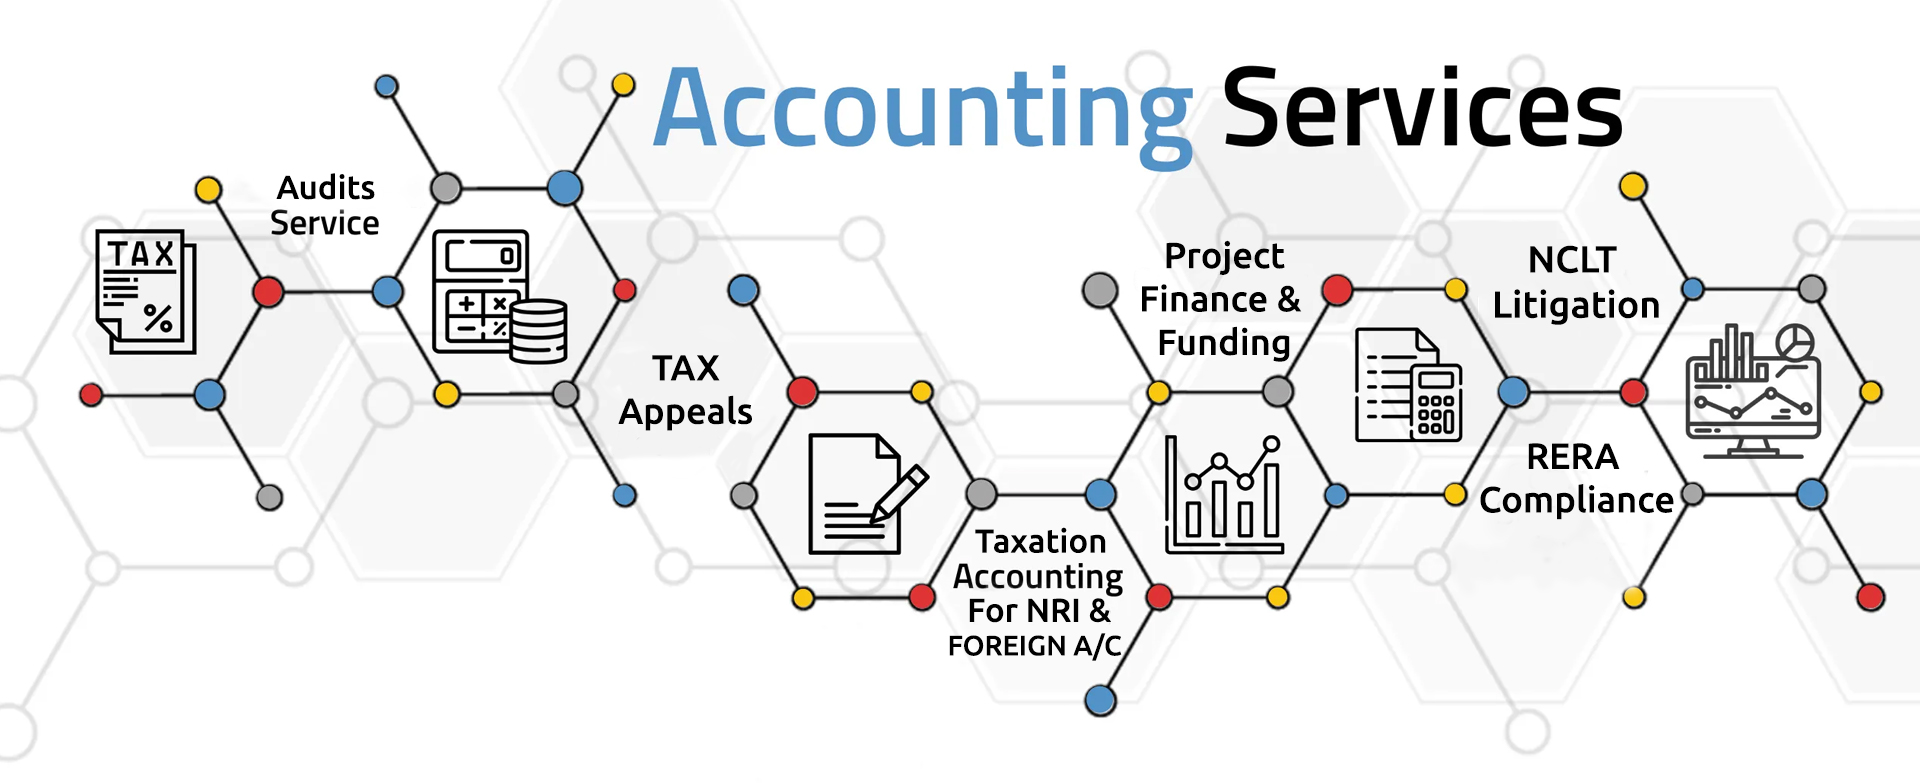 all types of Accounting Services